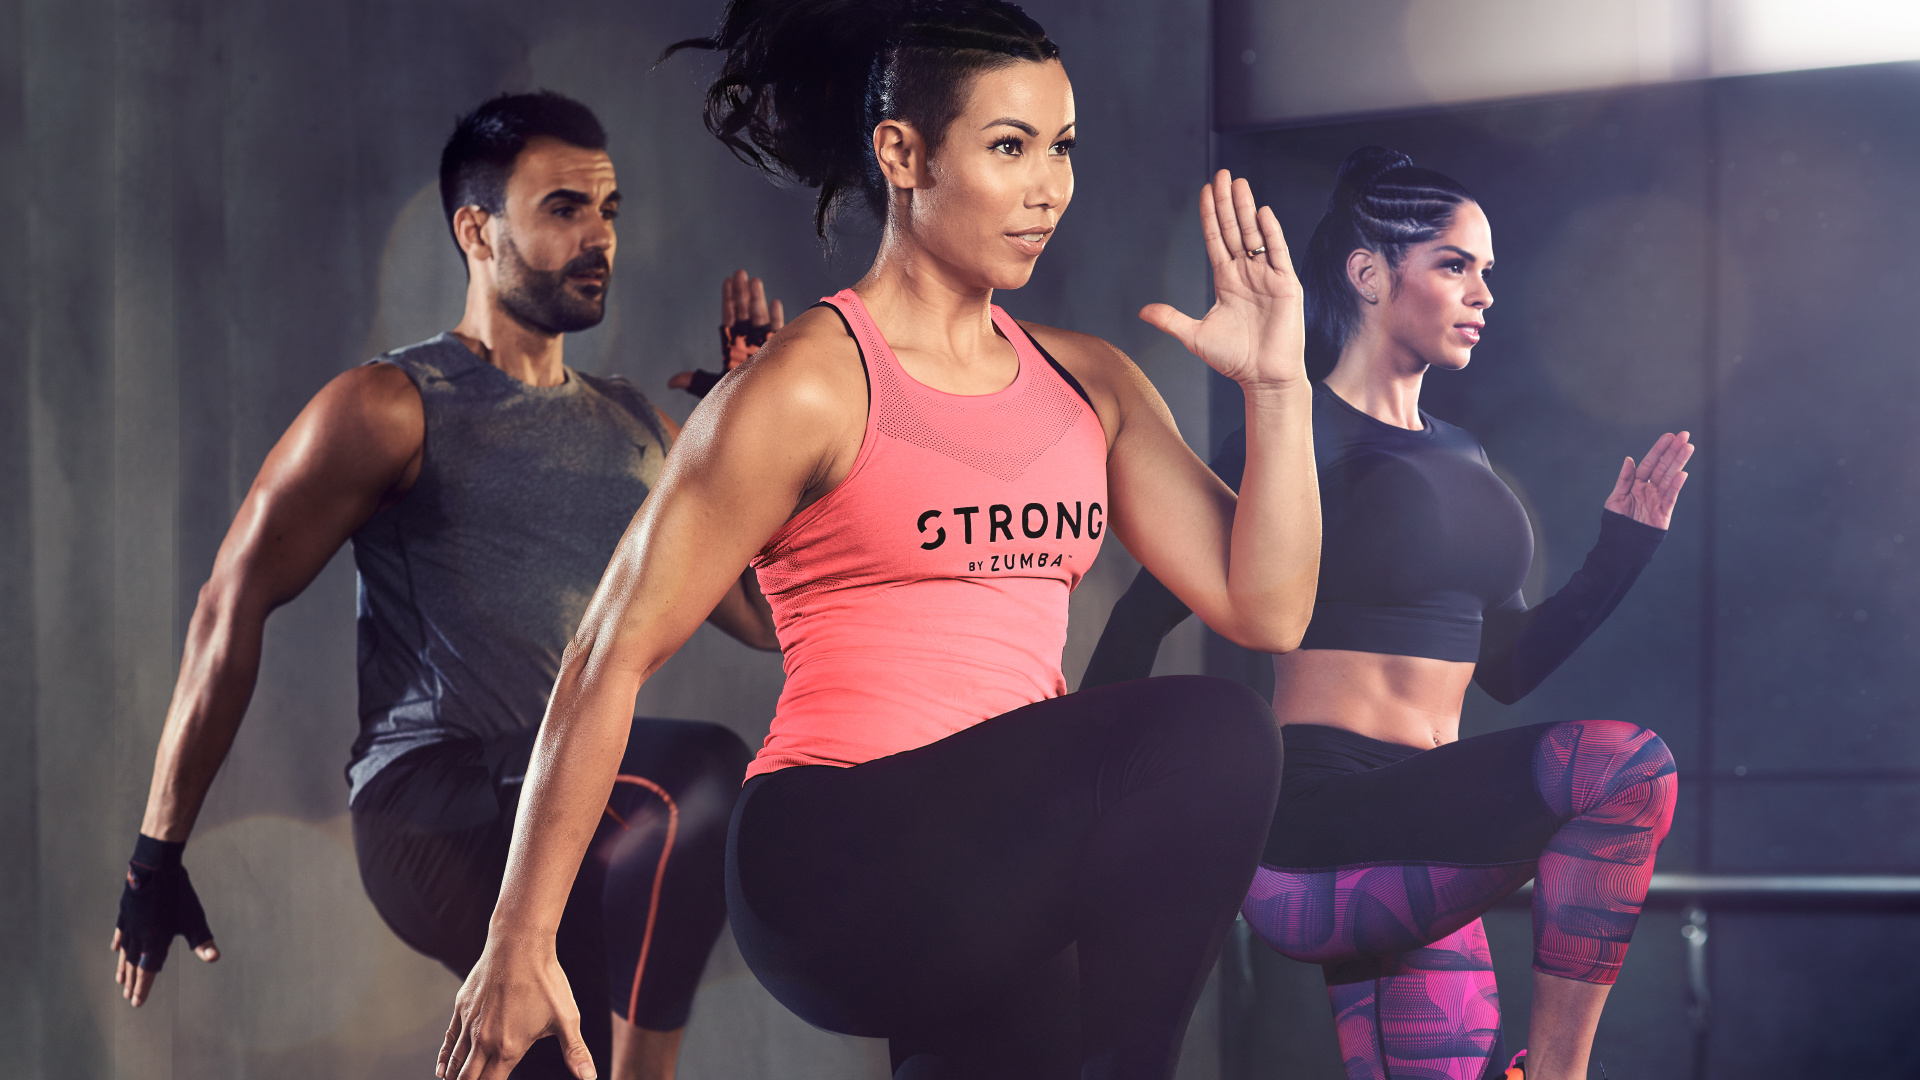 Zumba sports, Strong workouts, Endurance training, Fit and healthy, 1920x1080 Full HD Desktop